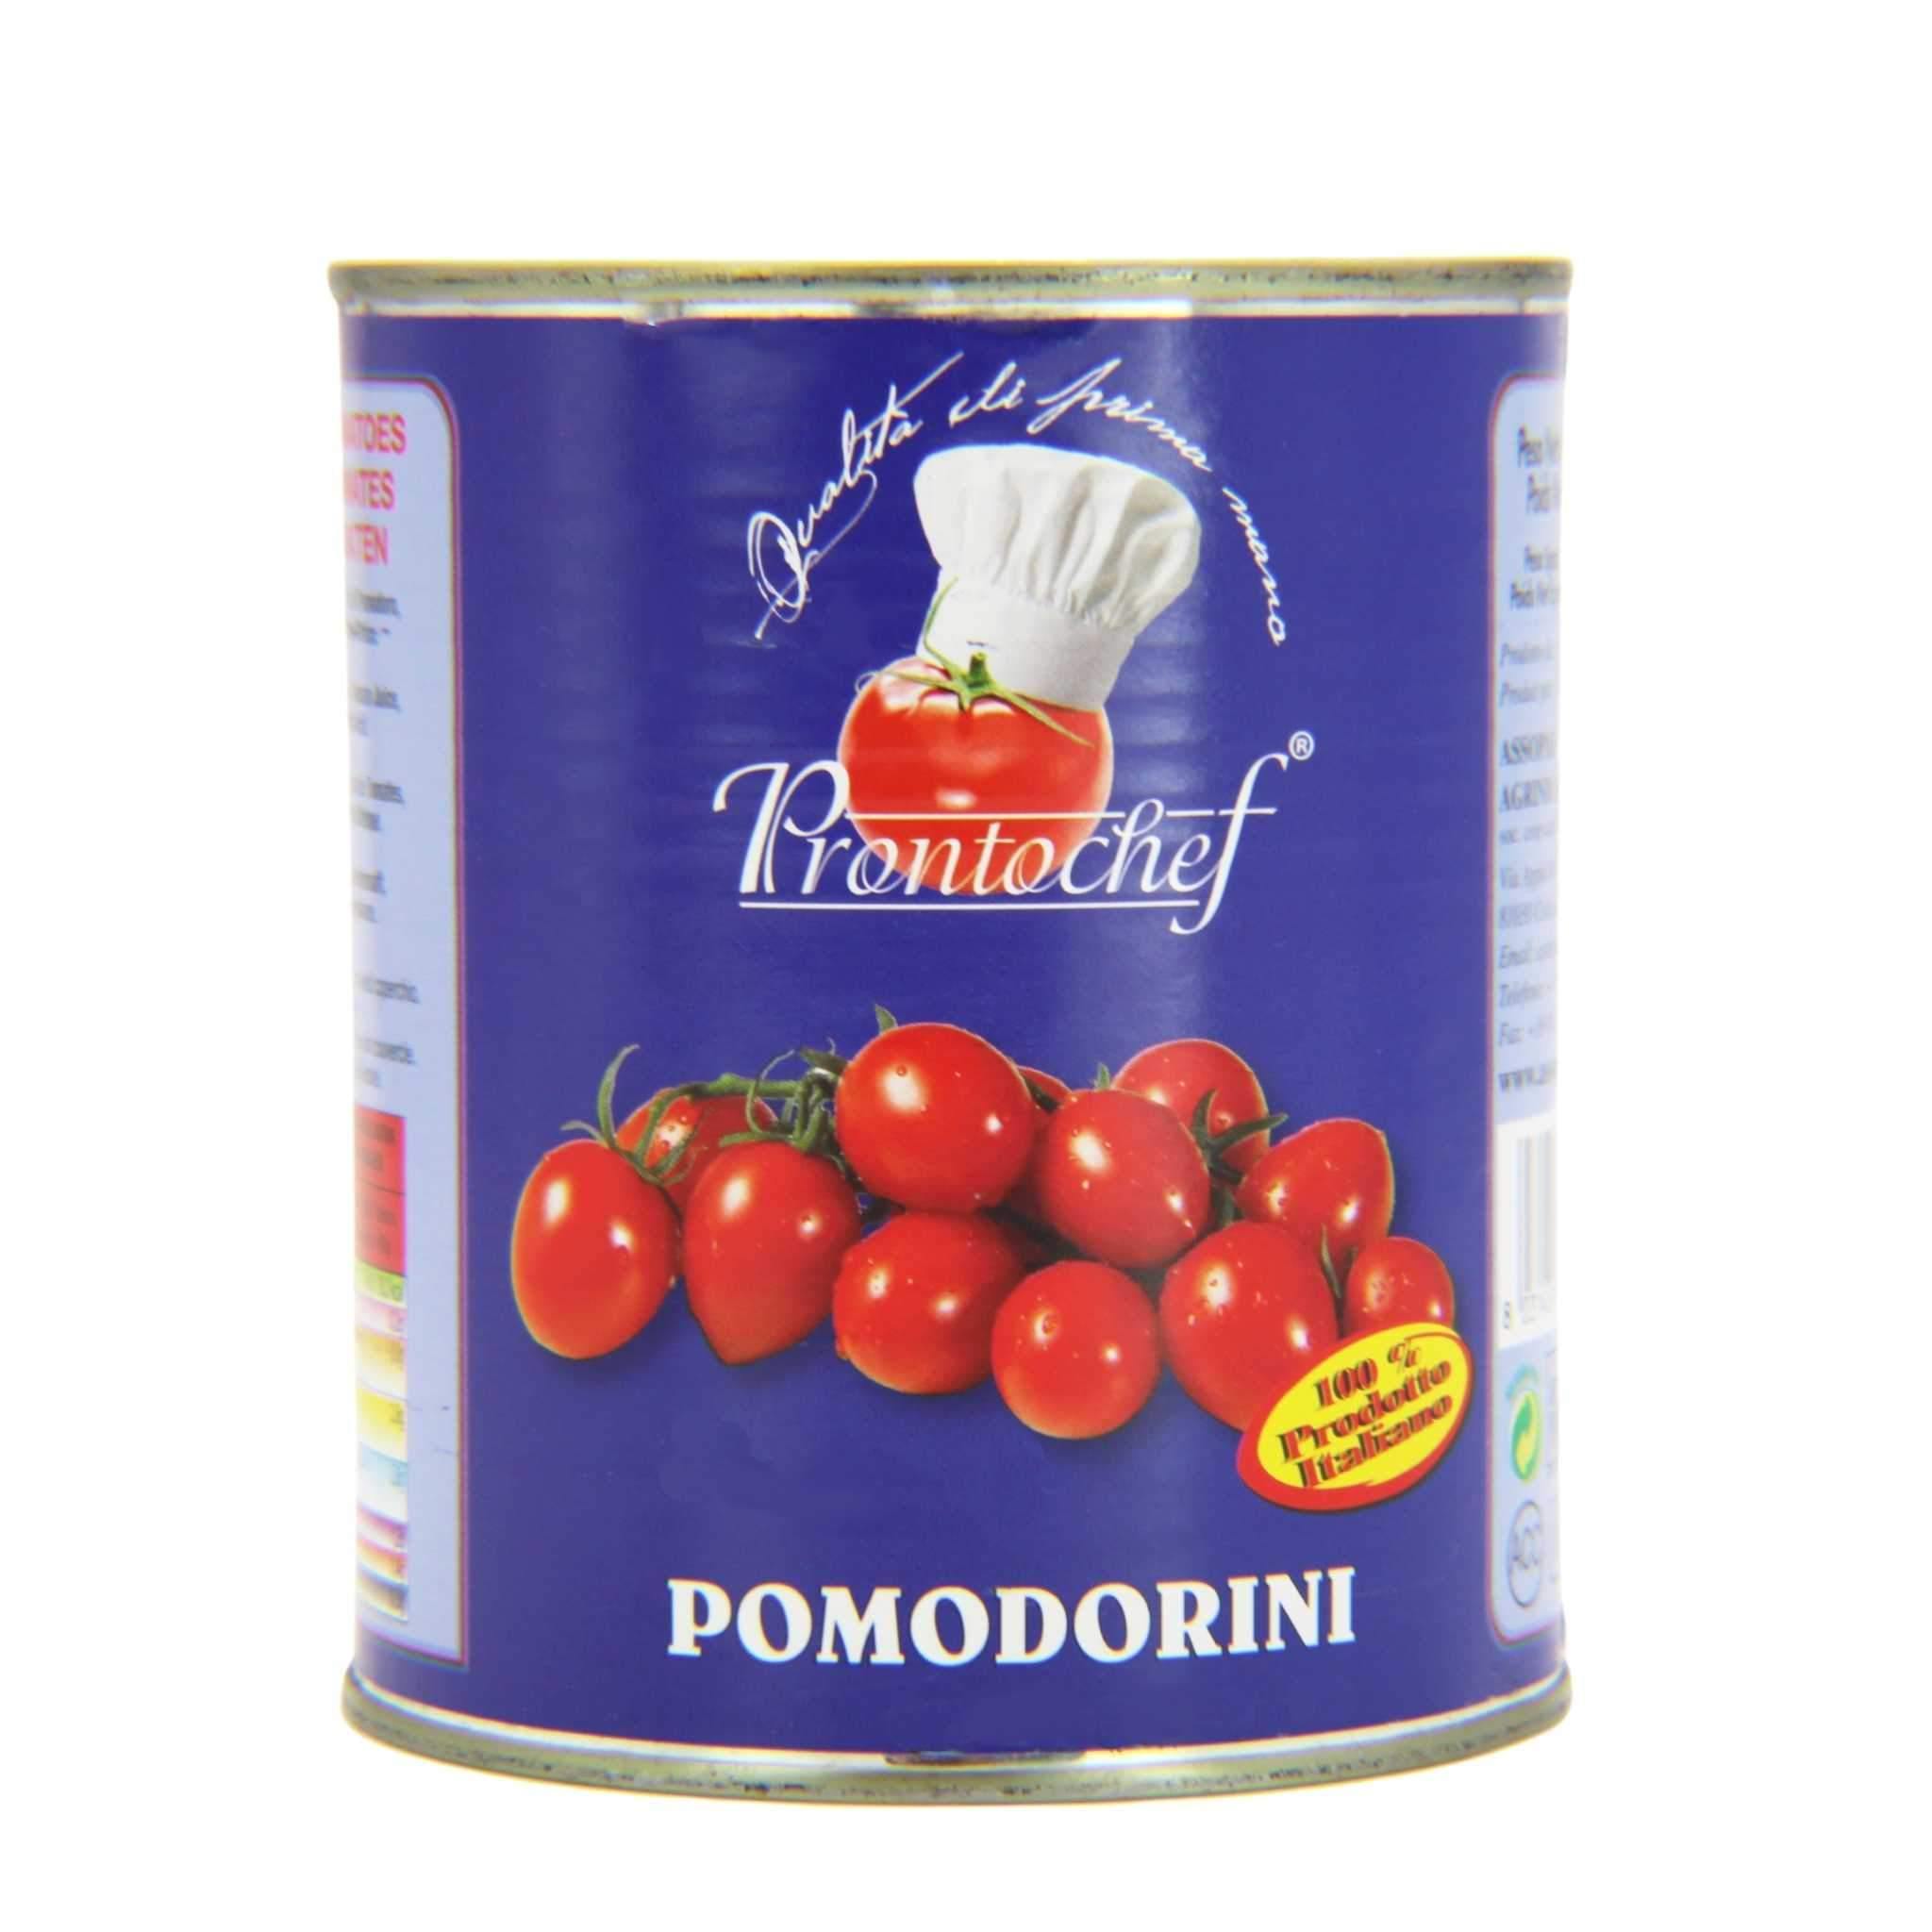 ProntoChef Cherry Tomatoes 28 oz. can. - Wholesale Italian Food